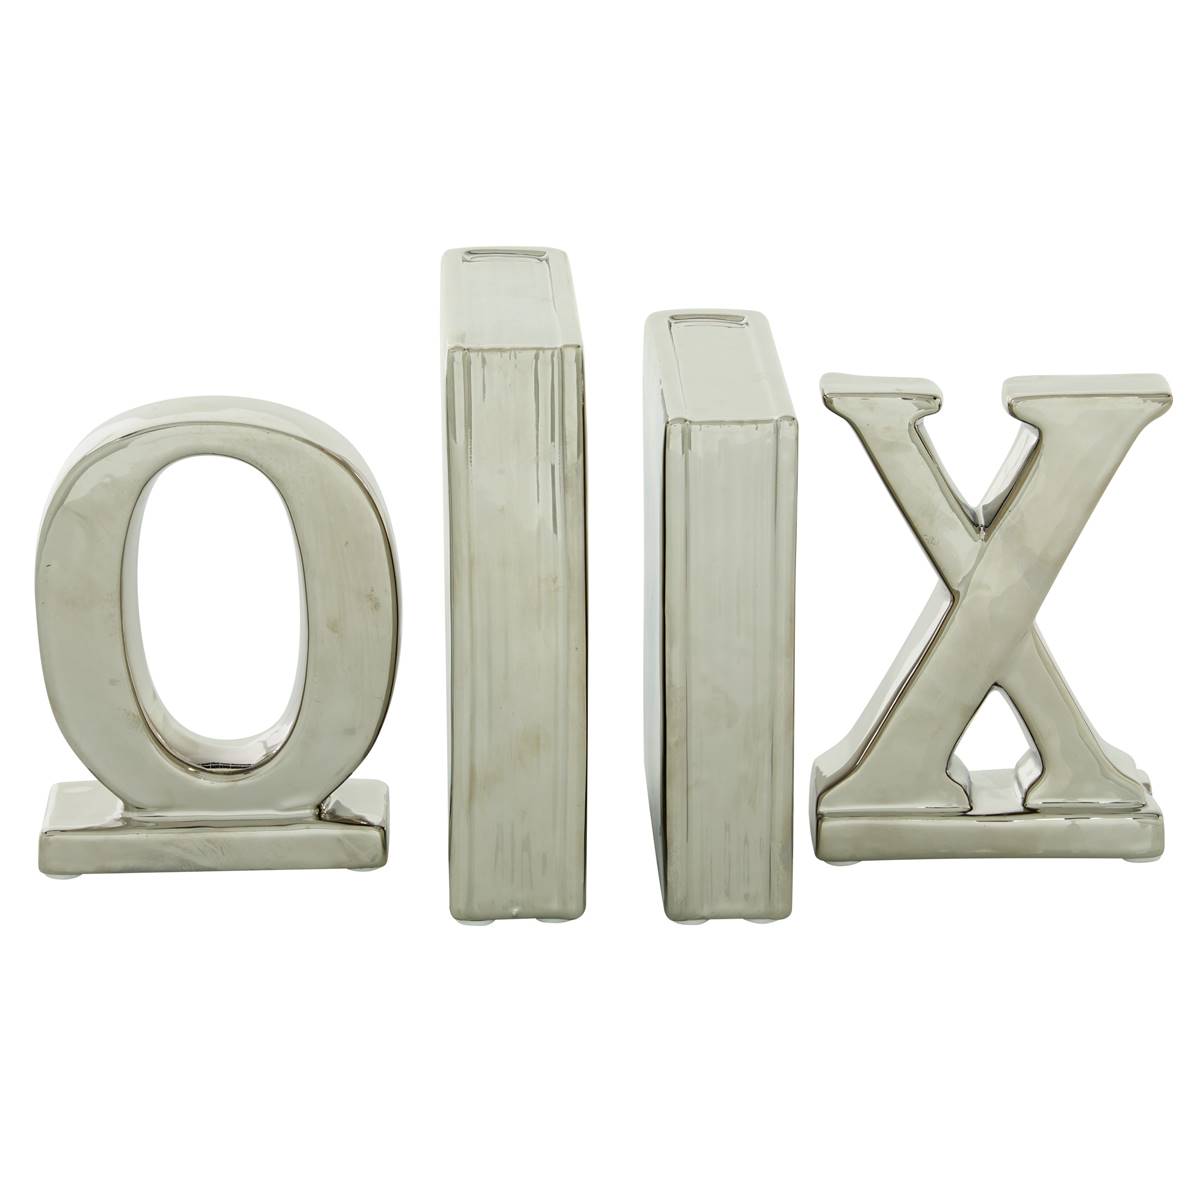 9th & Pike(R) Silver Ceramic Bookend Sculptures - Set Of 4